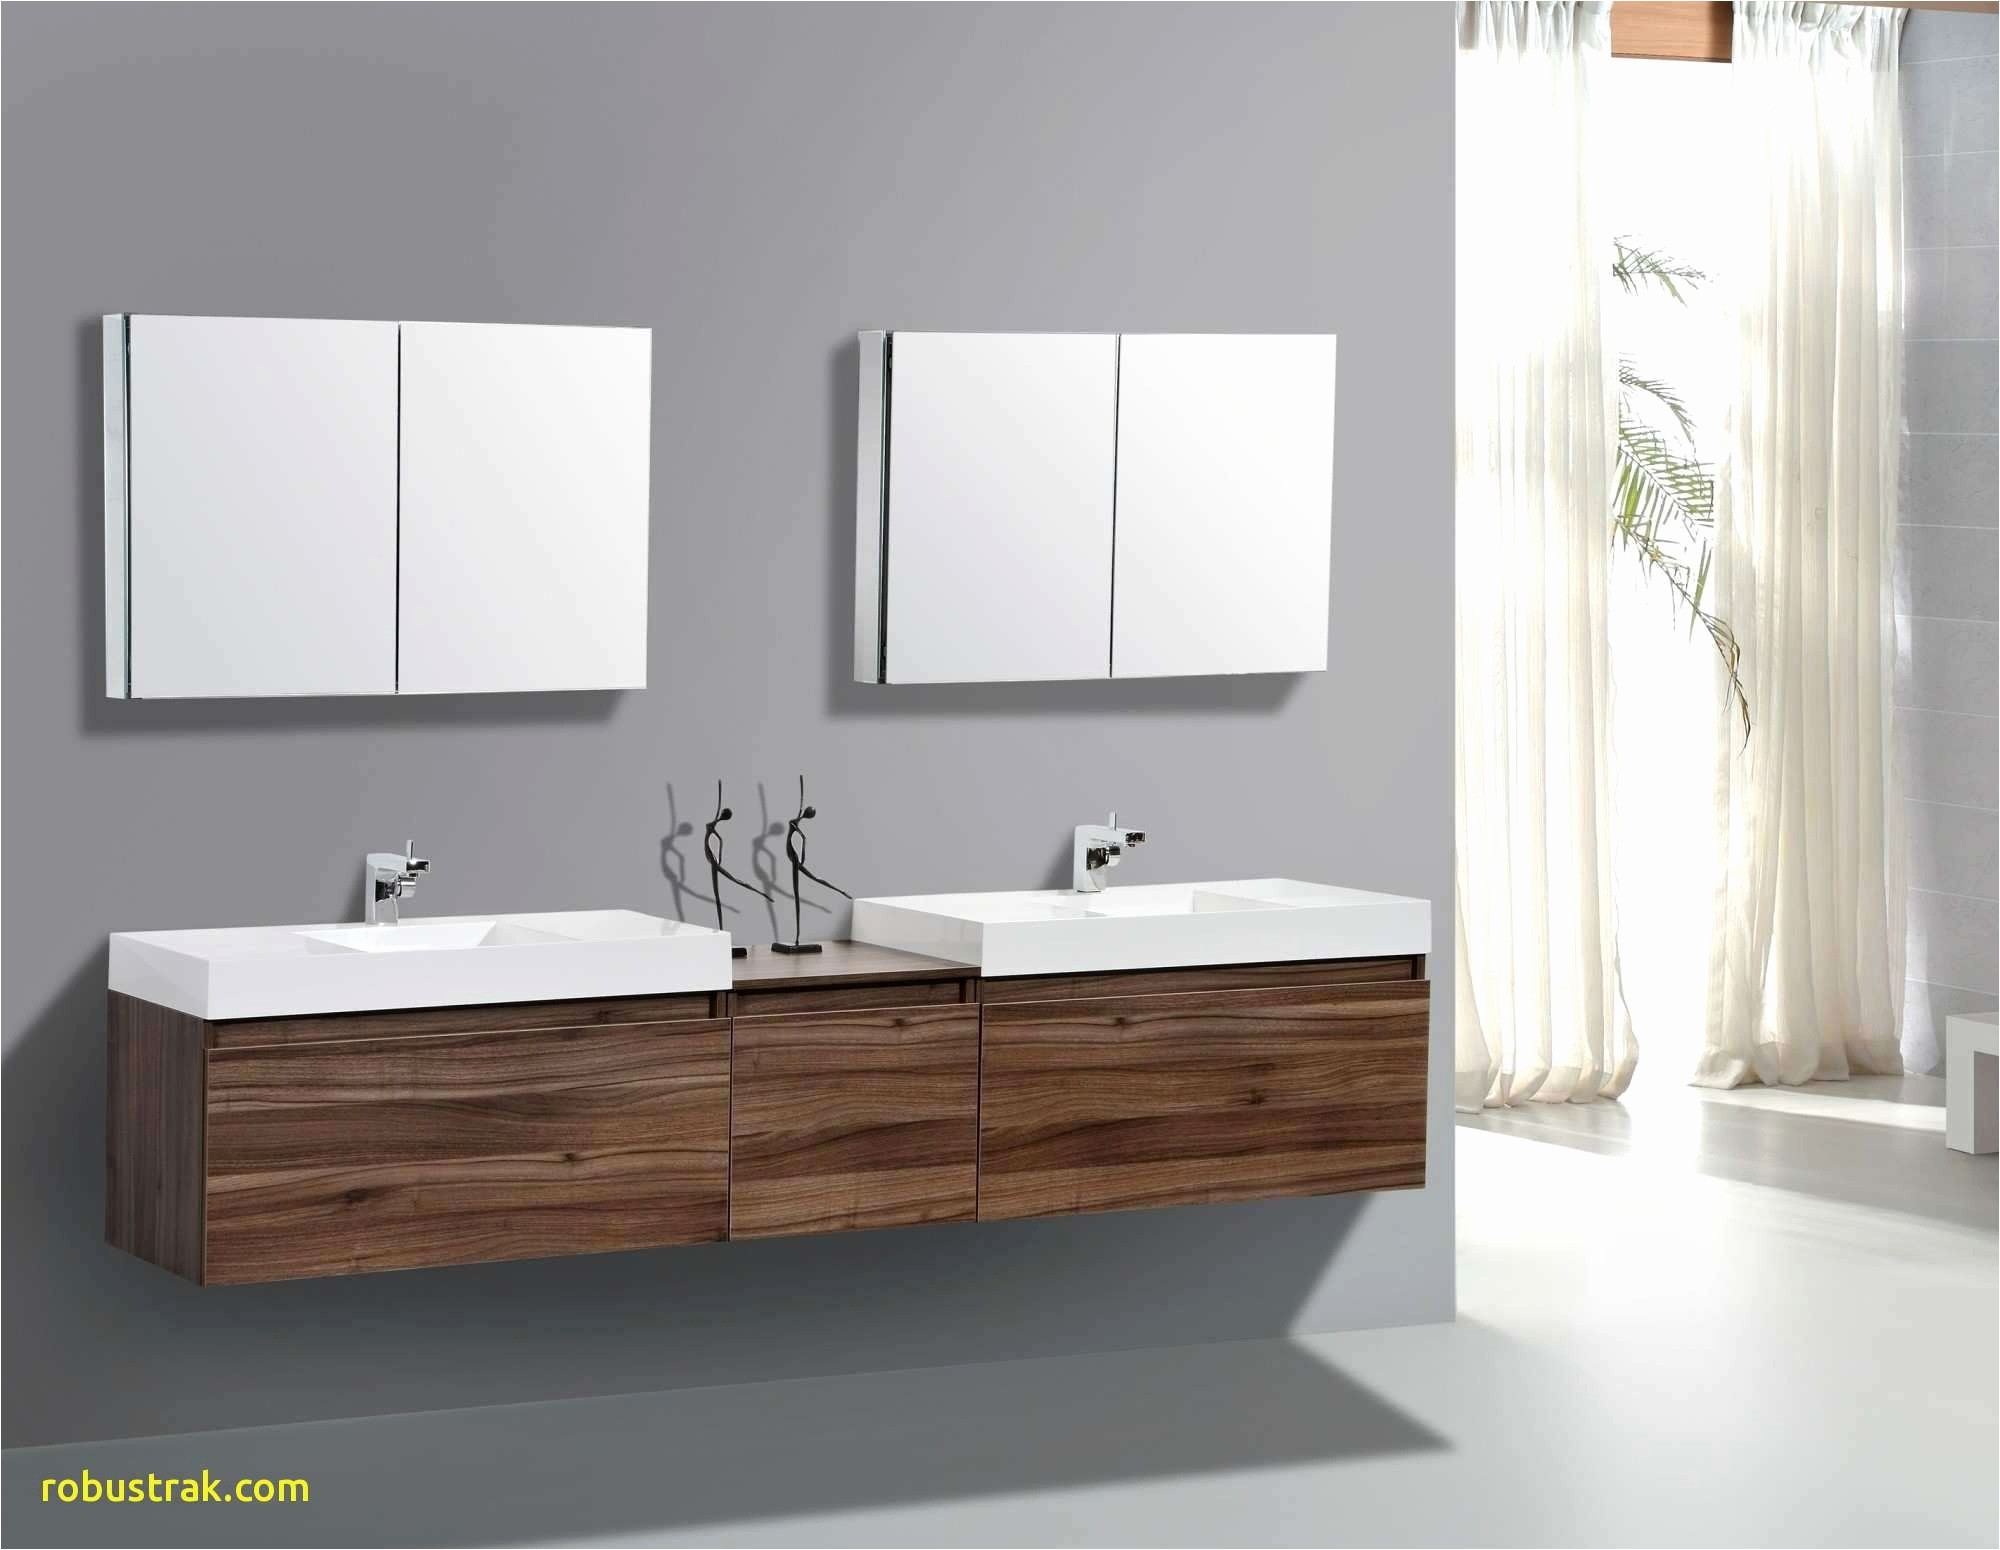 15 Awesome How Much is Hardwood Flooring at Lowes 2024 free download how much is hardwood flooring at lowes of tubs for bathrooms also awesome corner bath tubs inspirational with regard to tubs for bathrooms also awesome corner bath tubs inspirational toilets